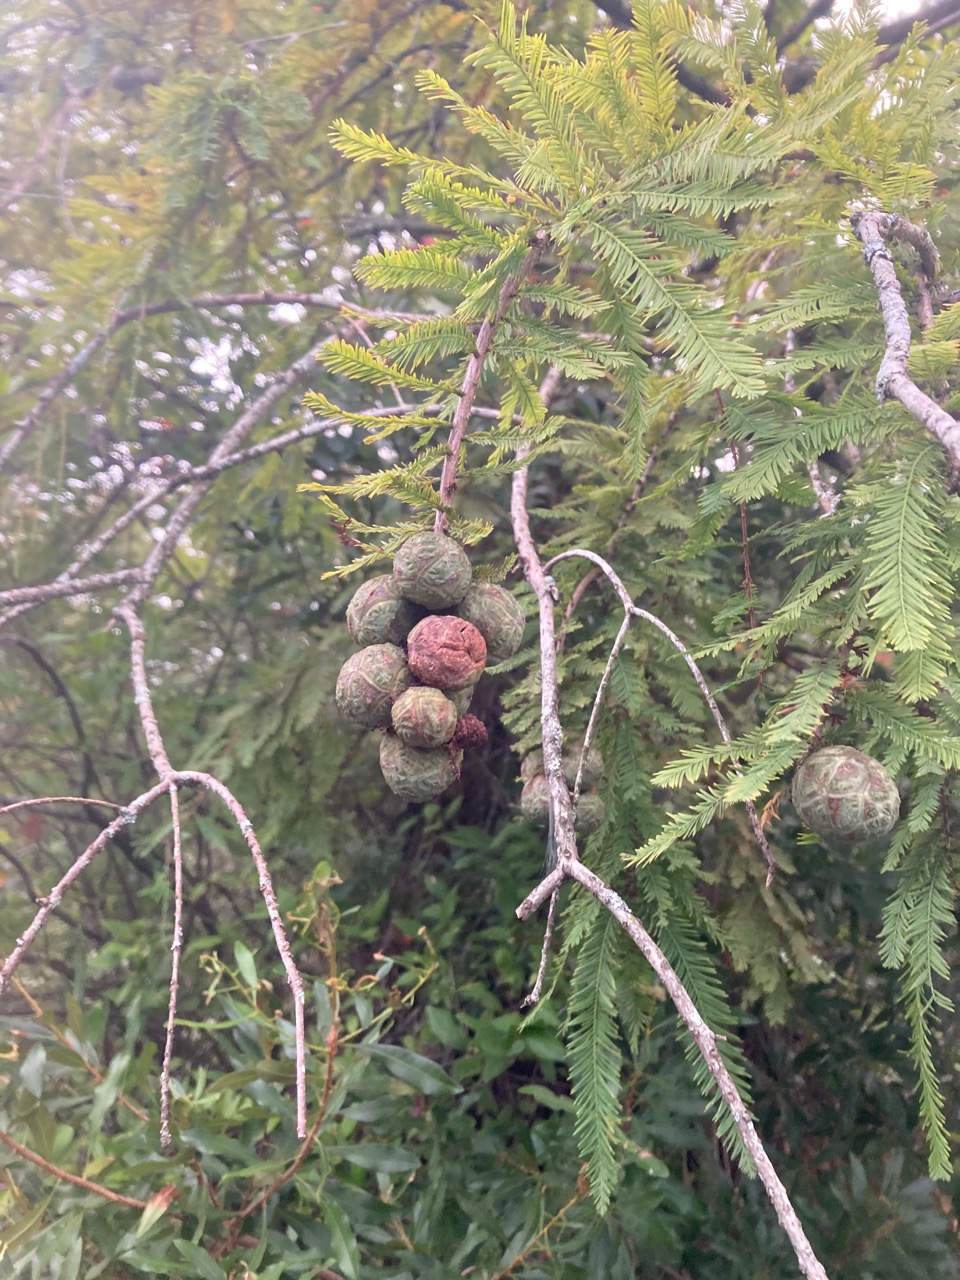 The Scientific Name is Taxodium distichum. You will likely hear them called Bald Cypress, Baldcypress, Swamp Cypress. This picture shows the Close-up of female cones of Taxodium distichum